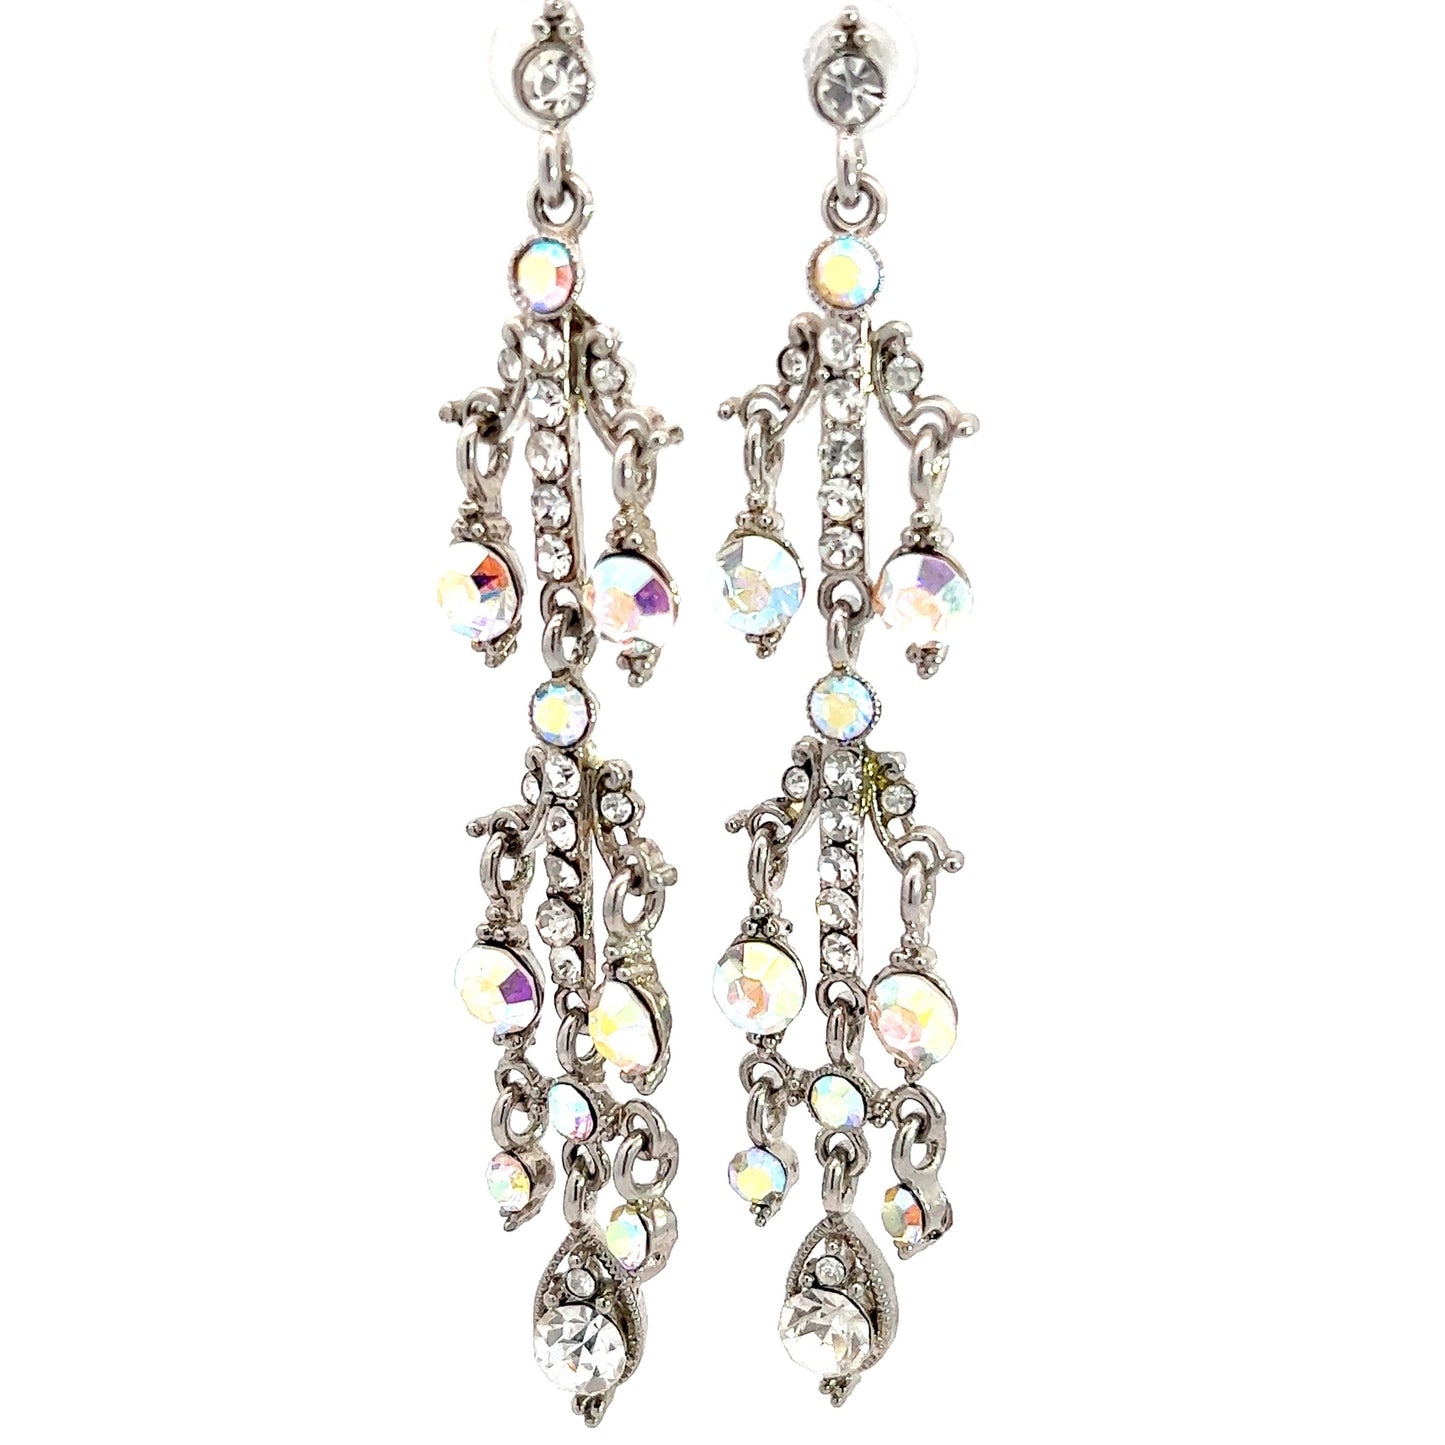 Load image into Gallery viewer, Iridescent Crystal Silver Statement Earrings - Born To Glam
